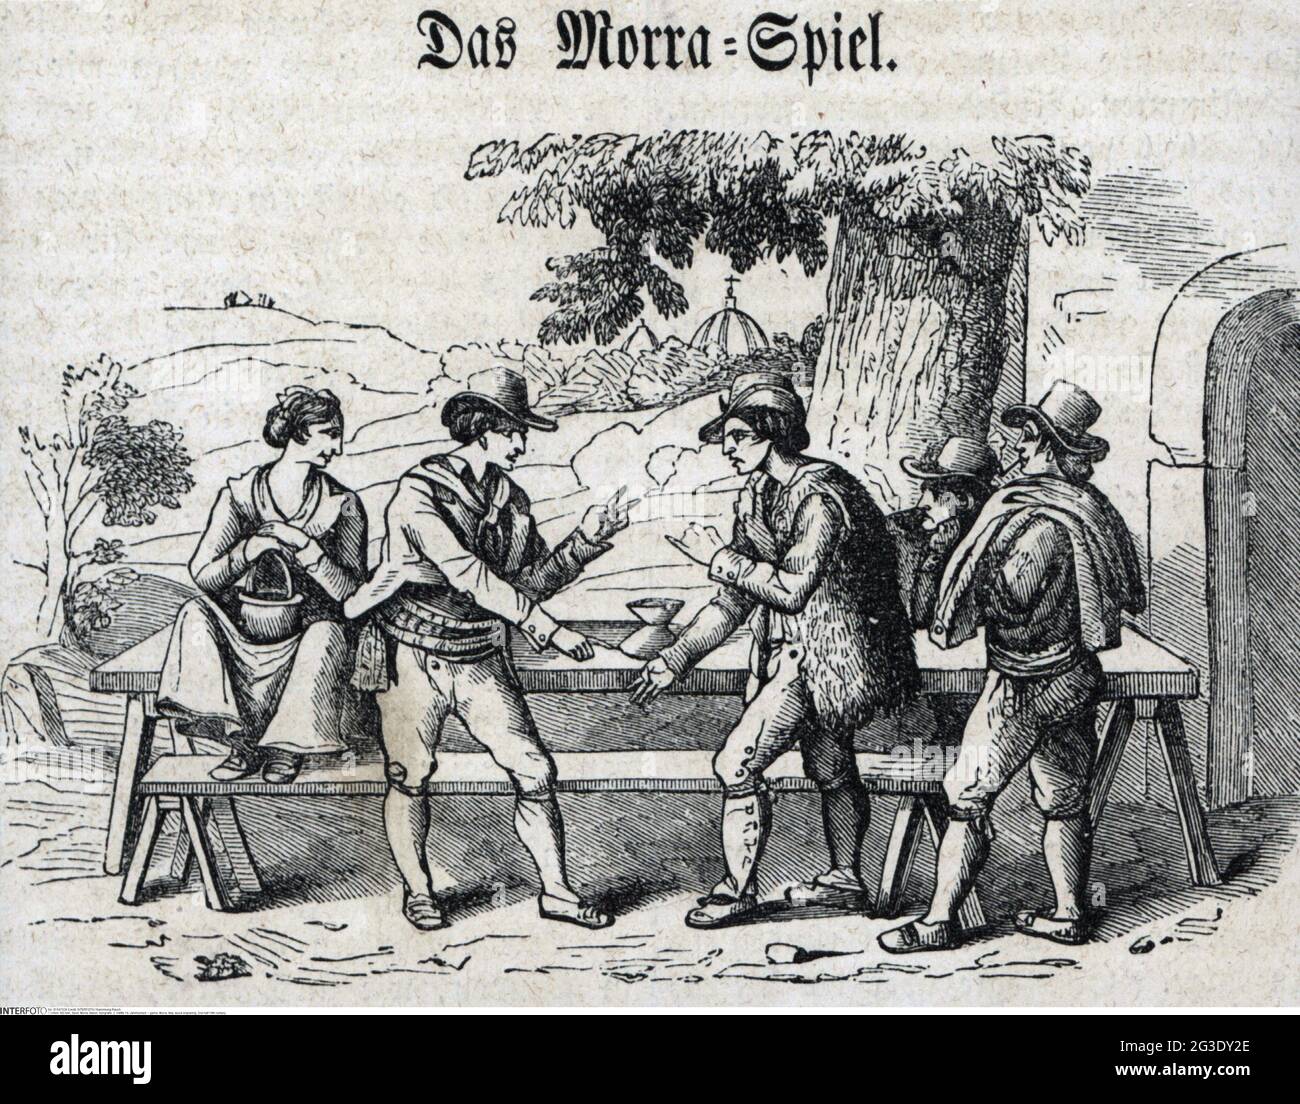 game, Morra, Italy, wood engraving, 2nd half 19th century, ARTIST'S COPYRIGHT HAS NOT TO BE CLEARED Stock Photo